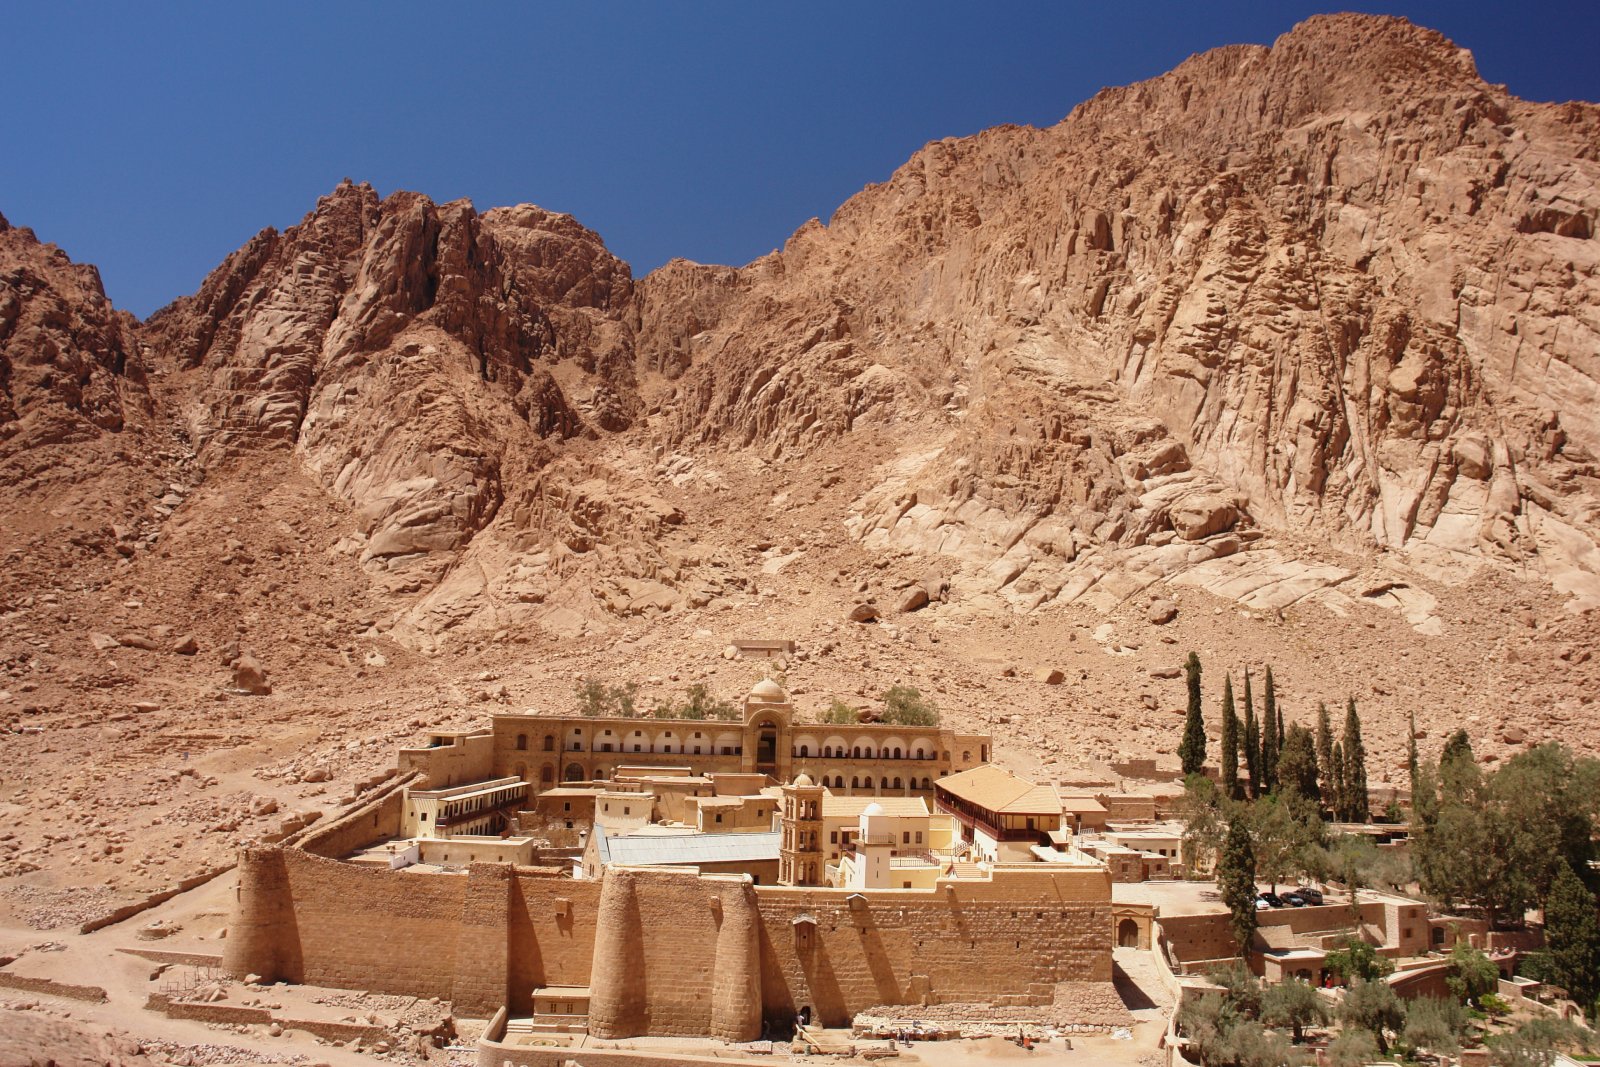 <p class="wp-caption-text">Image Credit: Shutterstock / Mildax</p>  <p><span>Mount Sinai, a mountain of profound religious and historical significance, is believed to be where Moses received the Ten Commandments. The rugged climb to its summit is rewarded with breathtaking sunrise views, a spiritual experience for many. St. Catherine’s Monastery is located at its base, an ancient Christian site home to a rich collection of religious manuscripts, icons, and art. This area’s blend of natural beauty and spiritual depth offers a reflective journey back in time, providing insights into the monotheistic religions that hold this mountain sacred.</span></p>